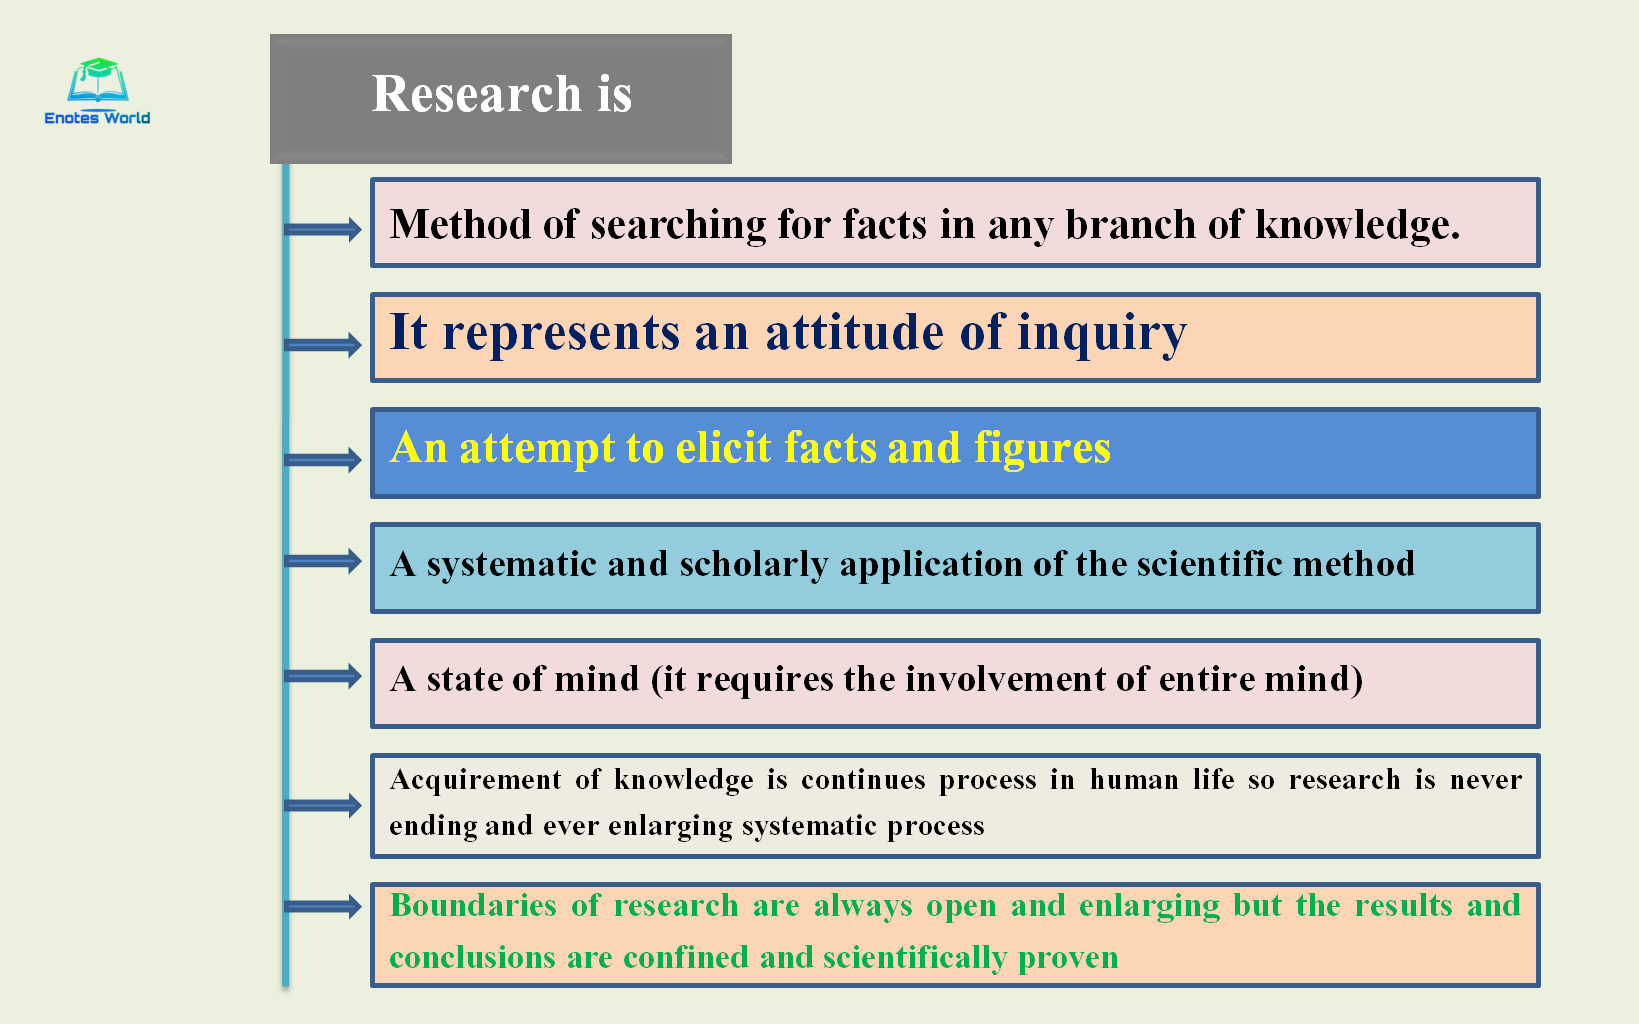 characteristics of research topic